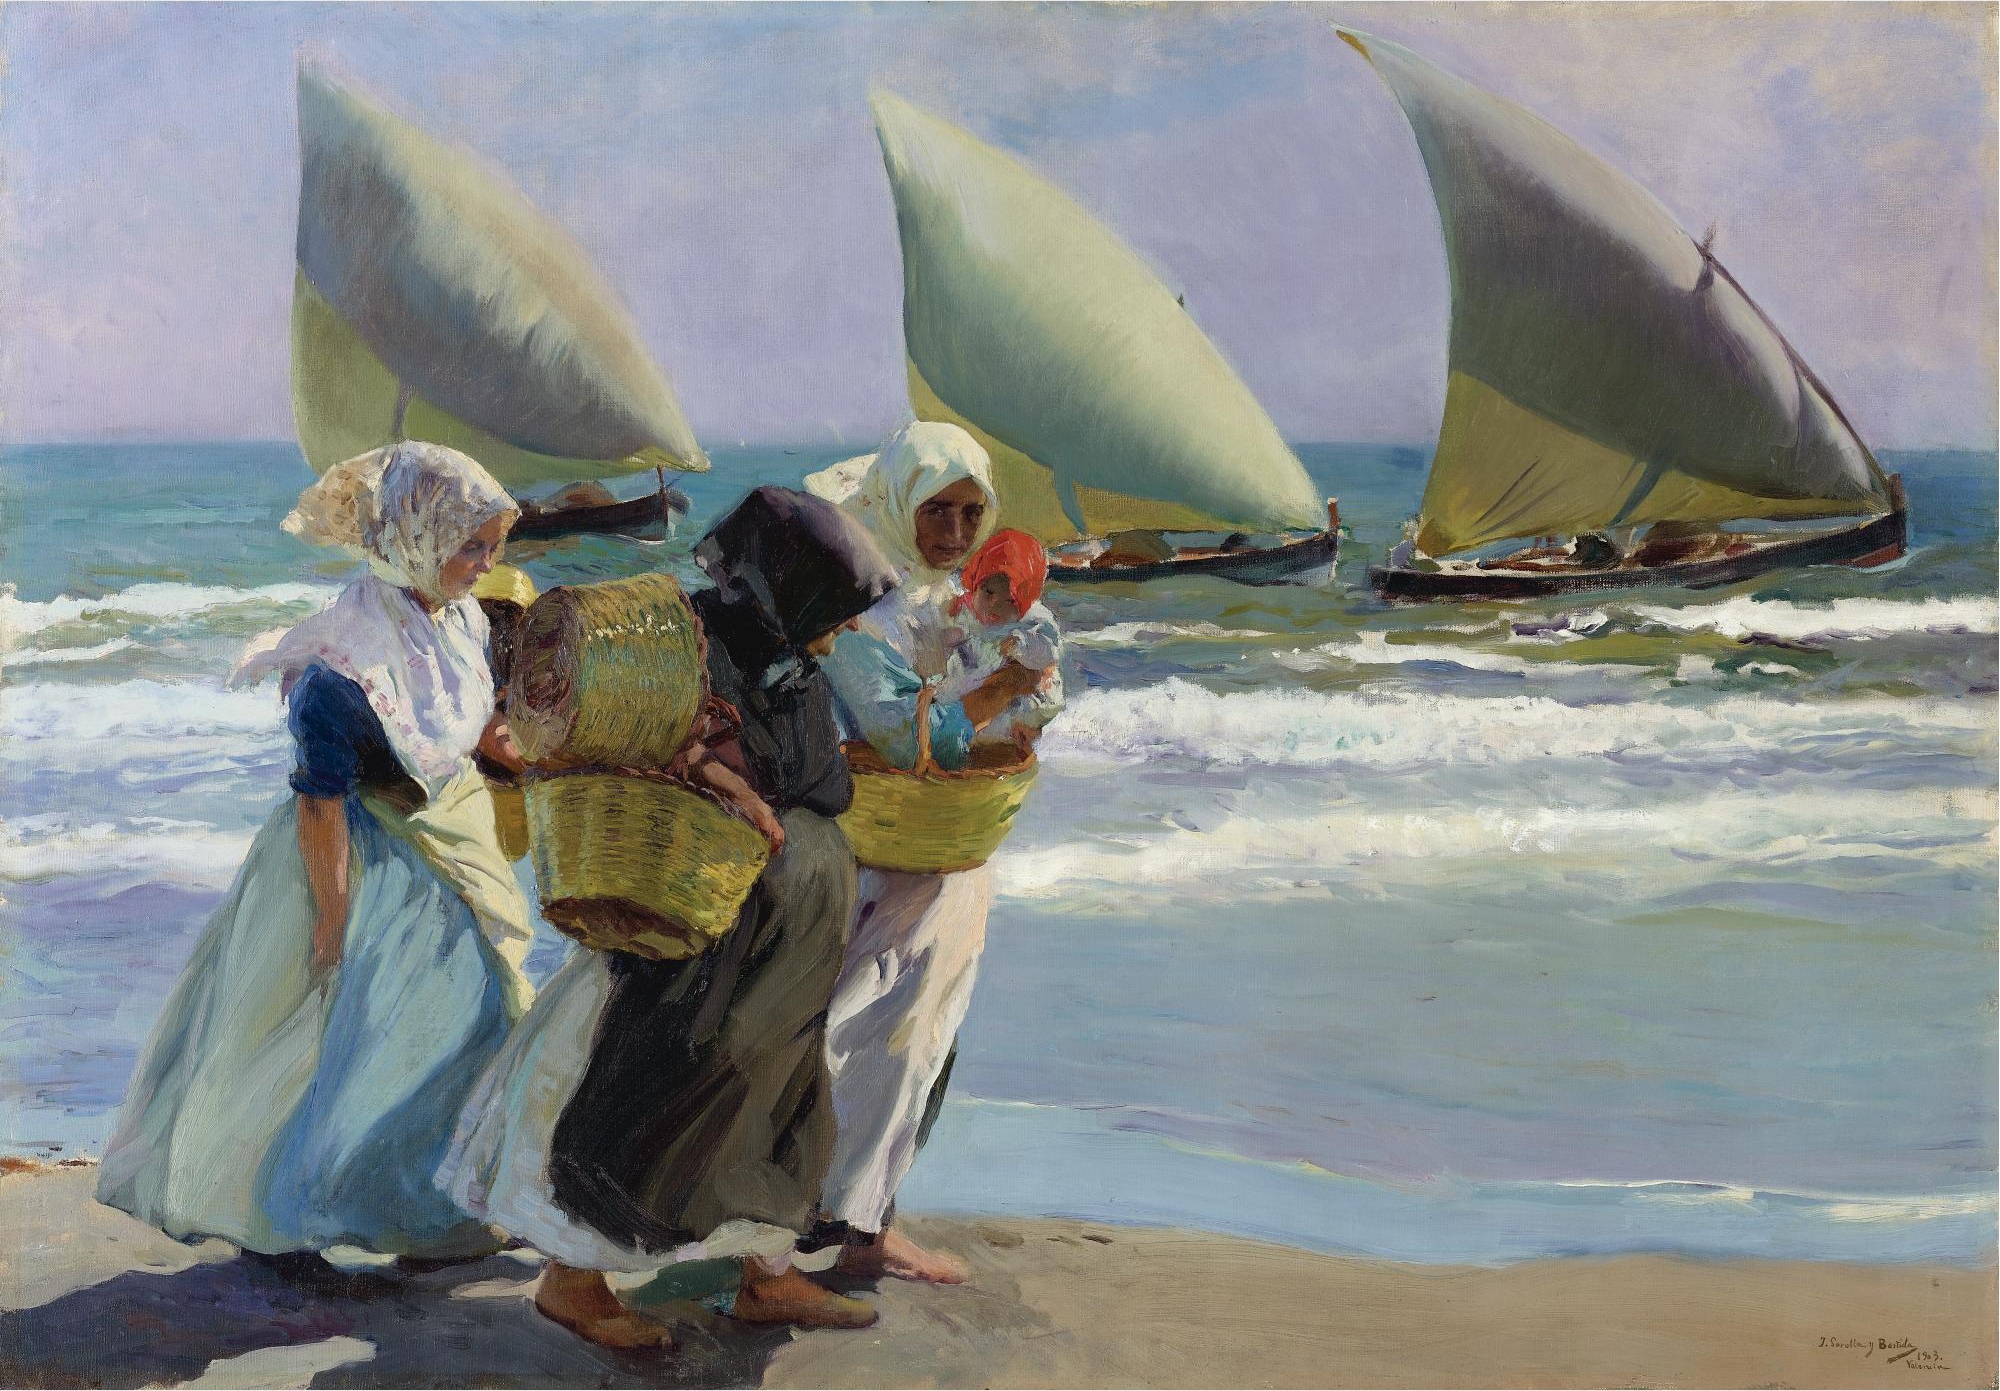 Three women carrying baskets walking along the shoreline with three sailboats in the background